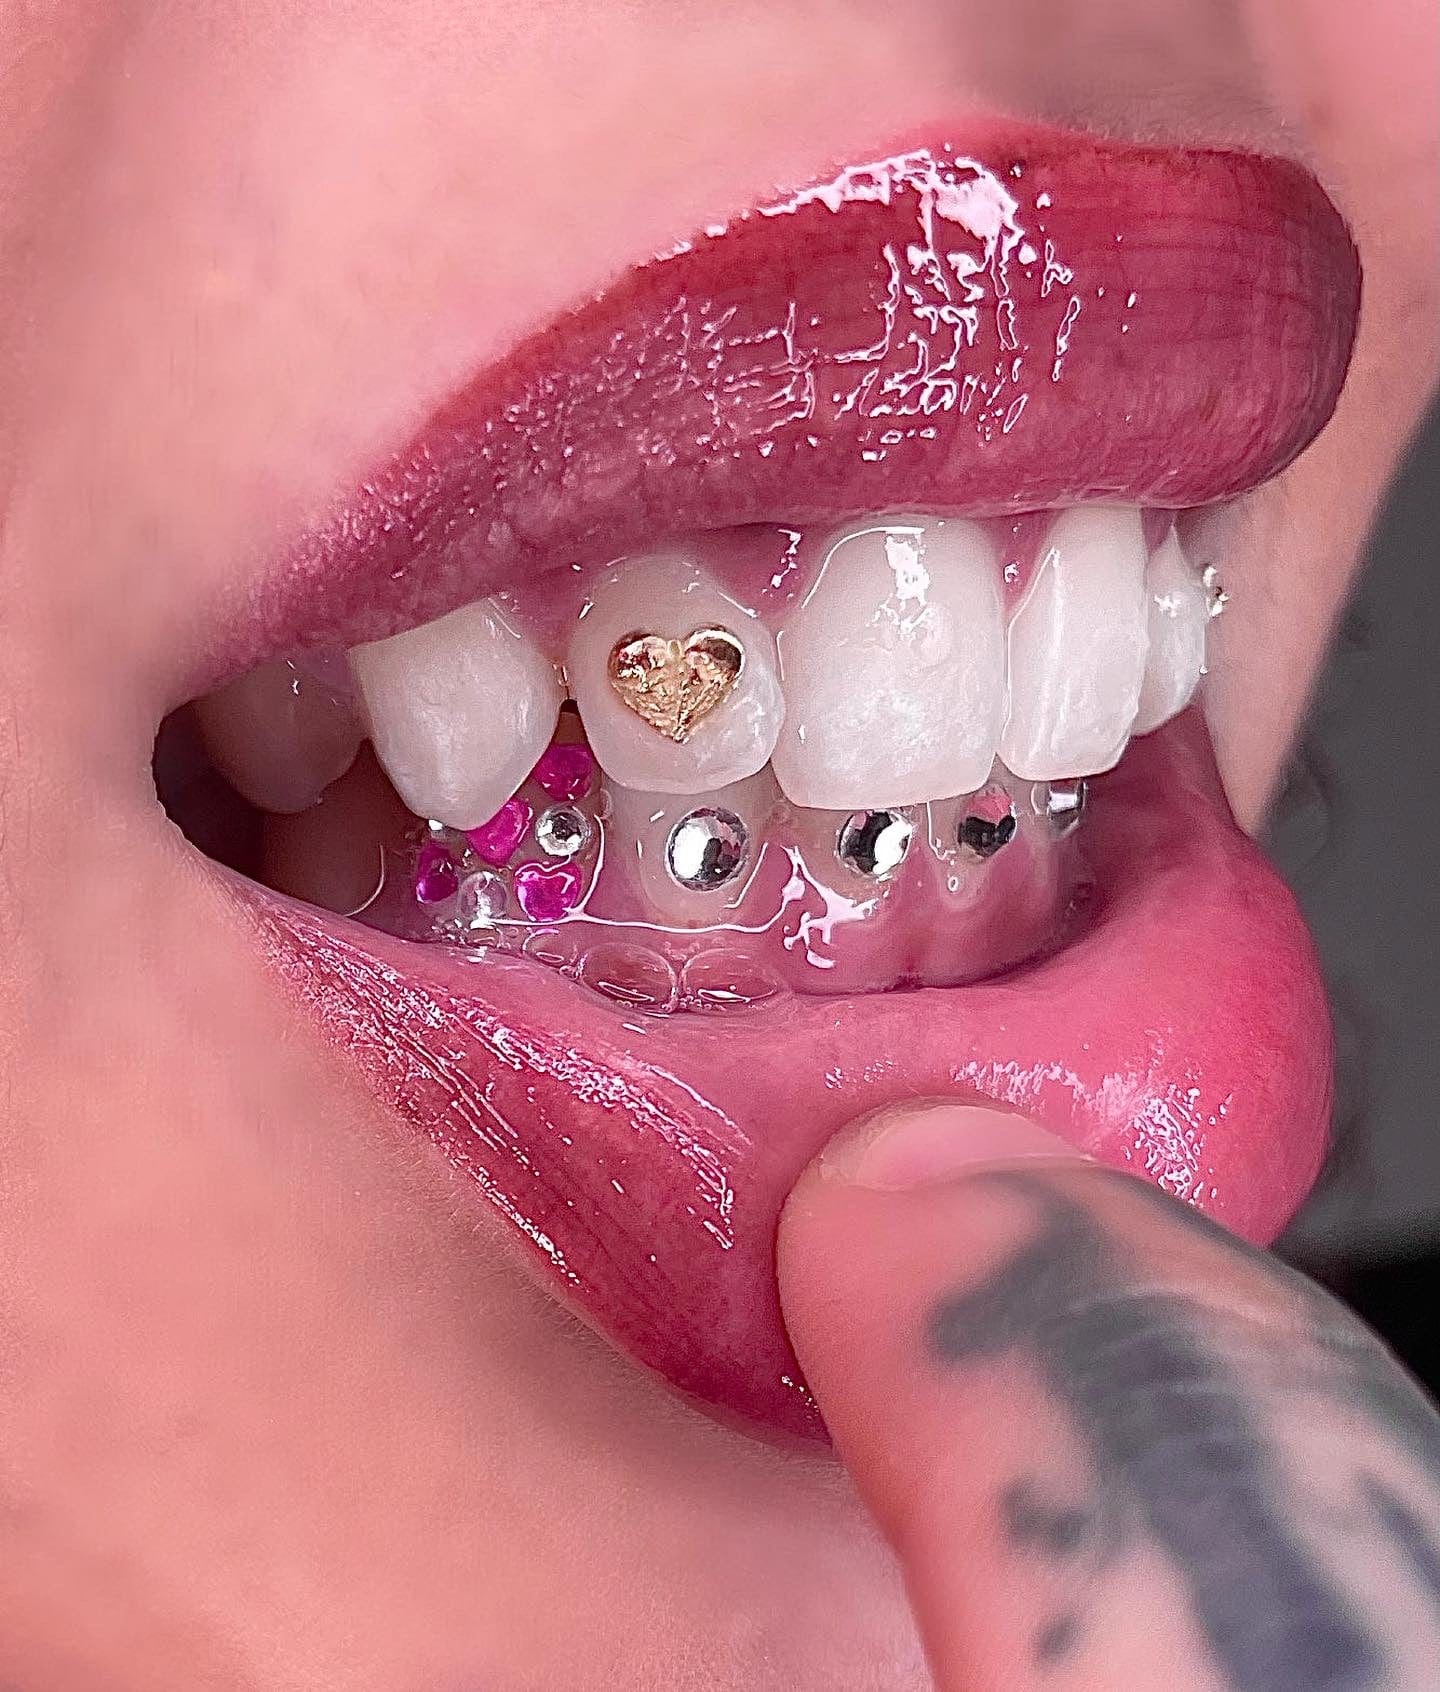 Bijoux dentaire Isis&gold Lover of death Halloween Edition tooth gems